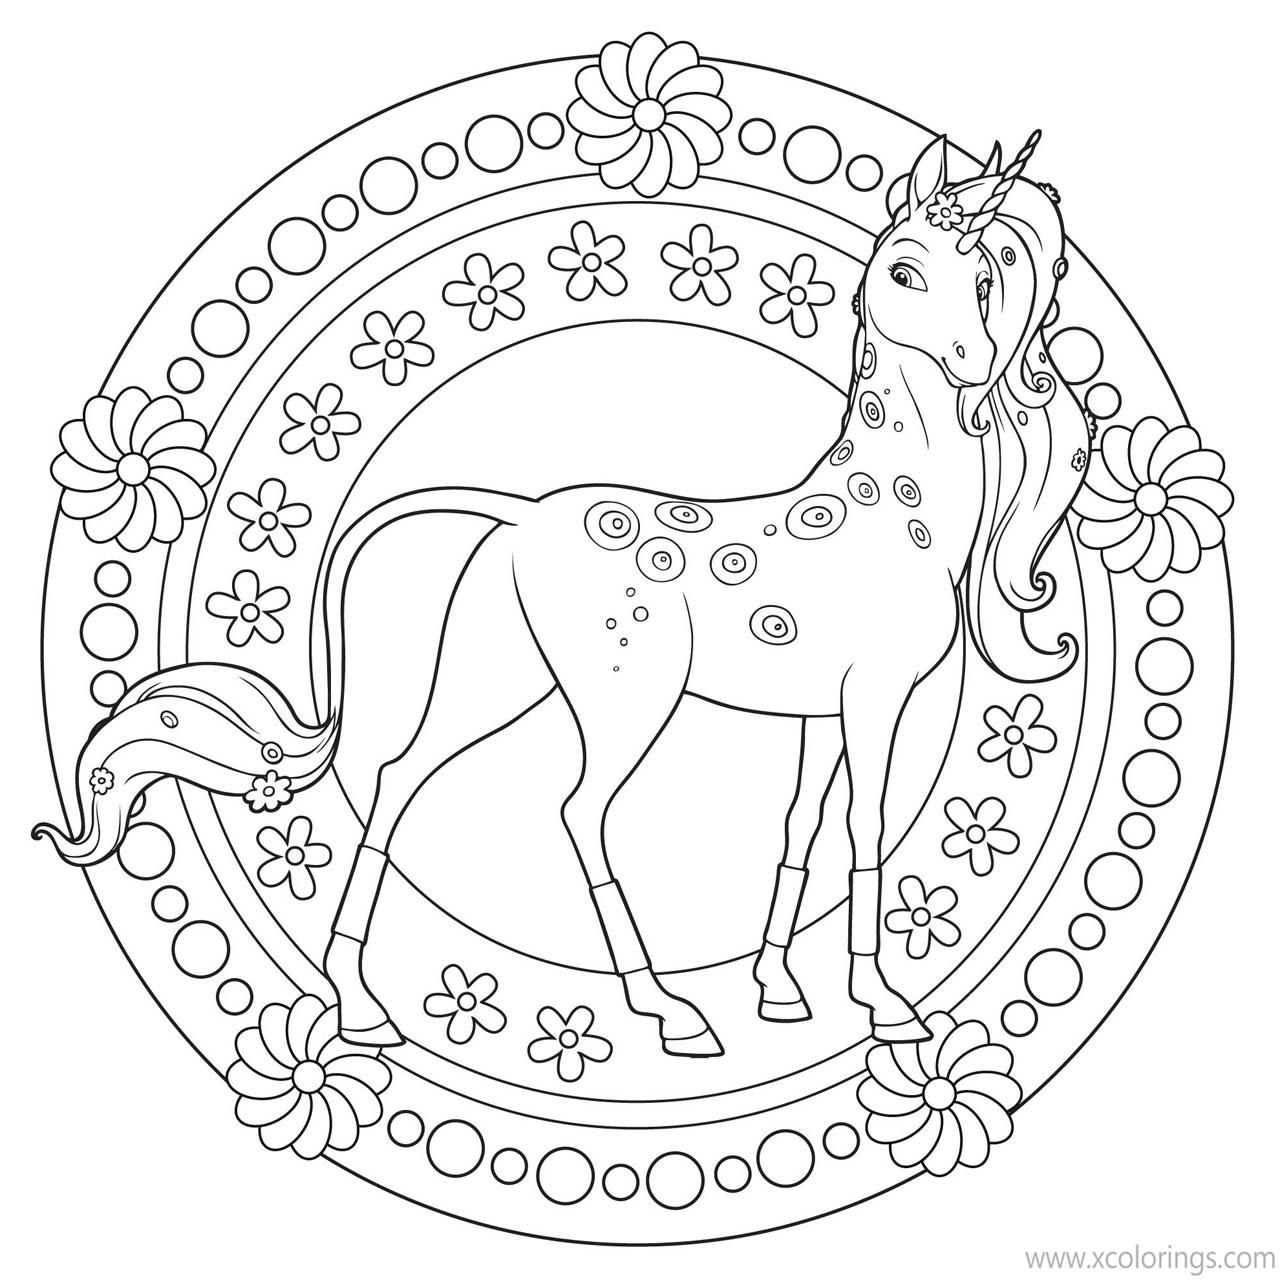 Free Mia And Me Coloring Pages Unicorn Lyria printable